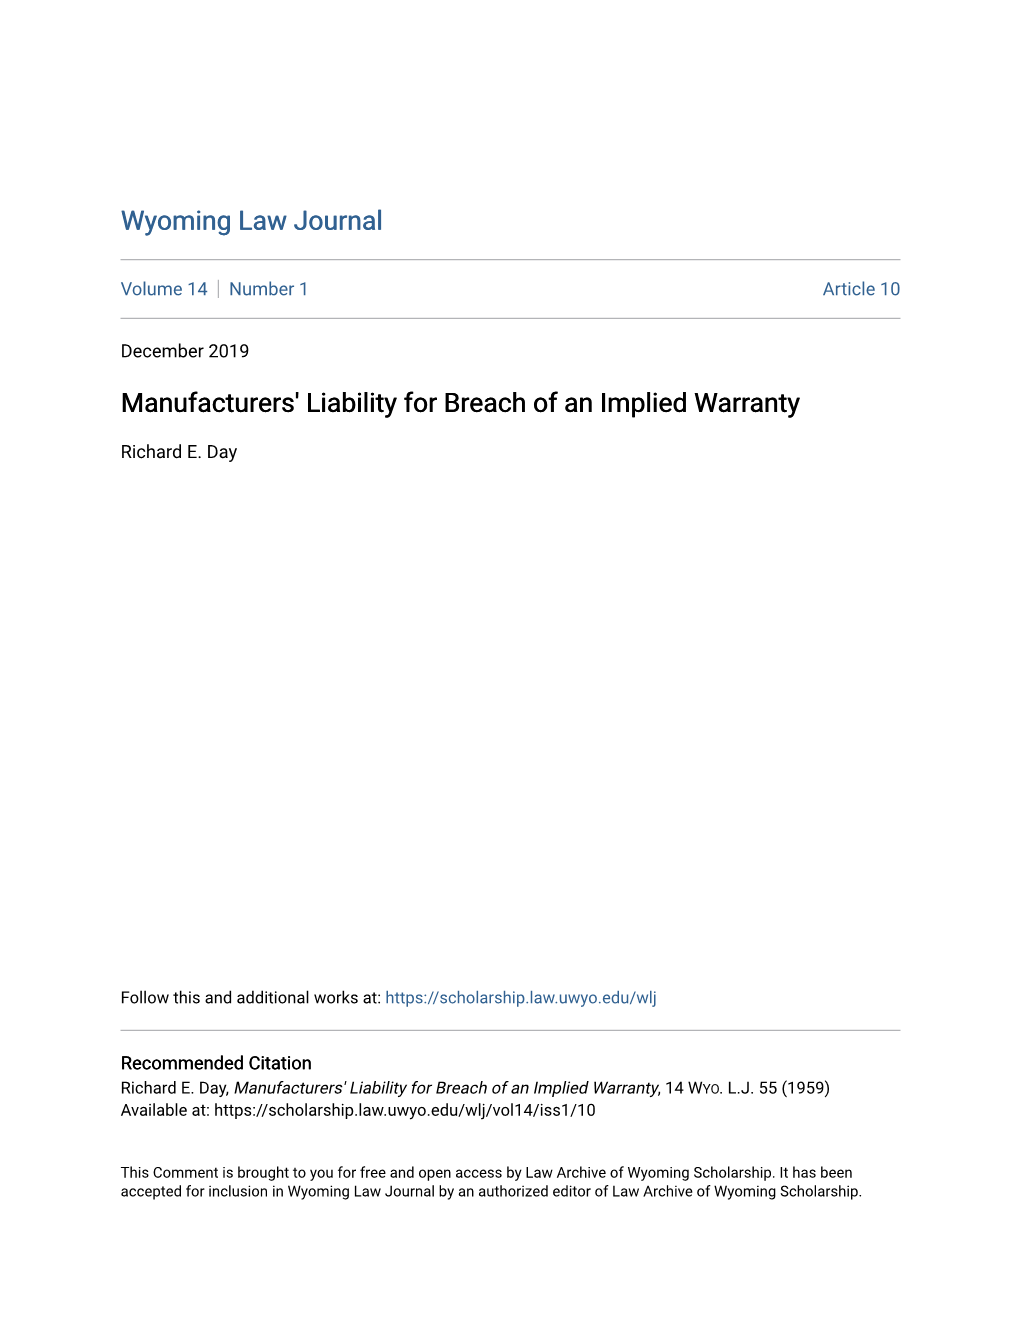 Manufacturers' Liability for Breach of an Implied Warranty